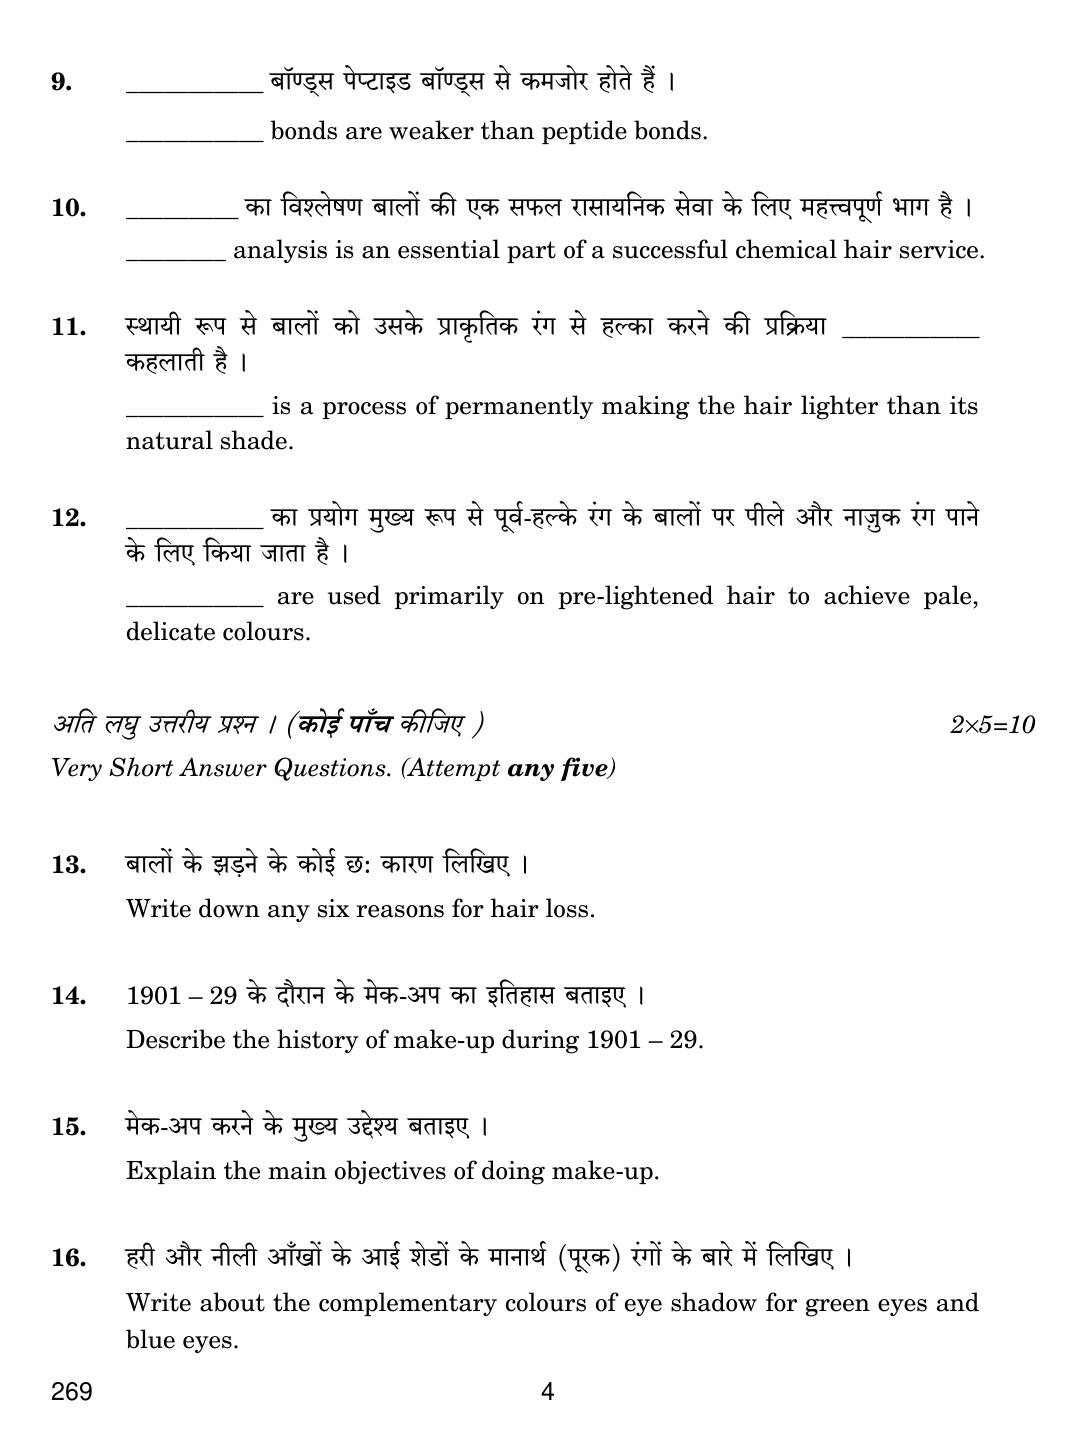 CBSE Class 12 269 Beauty And Hair 2019 Question Paper - Page 4